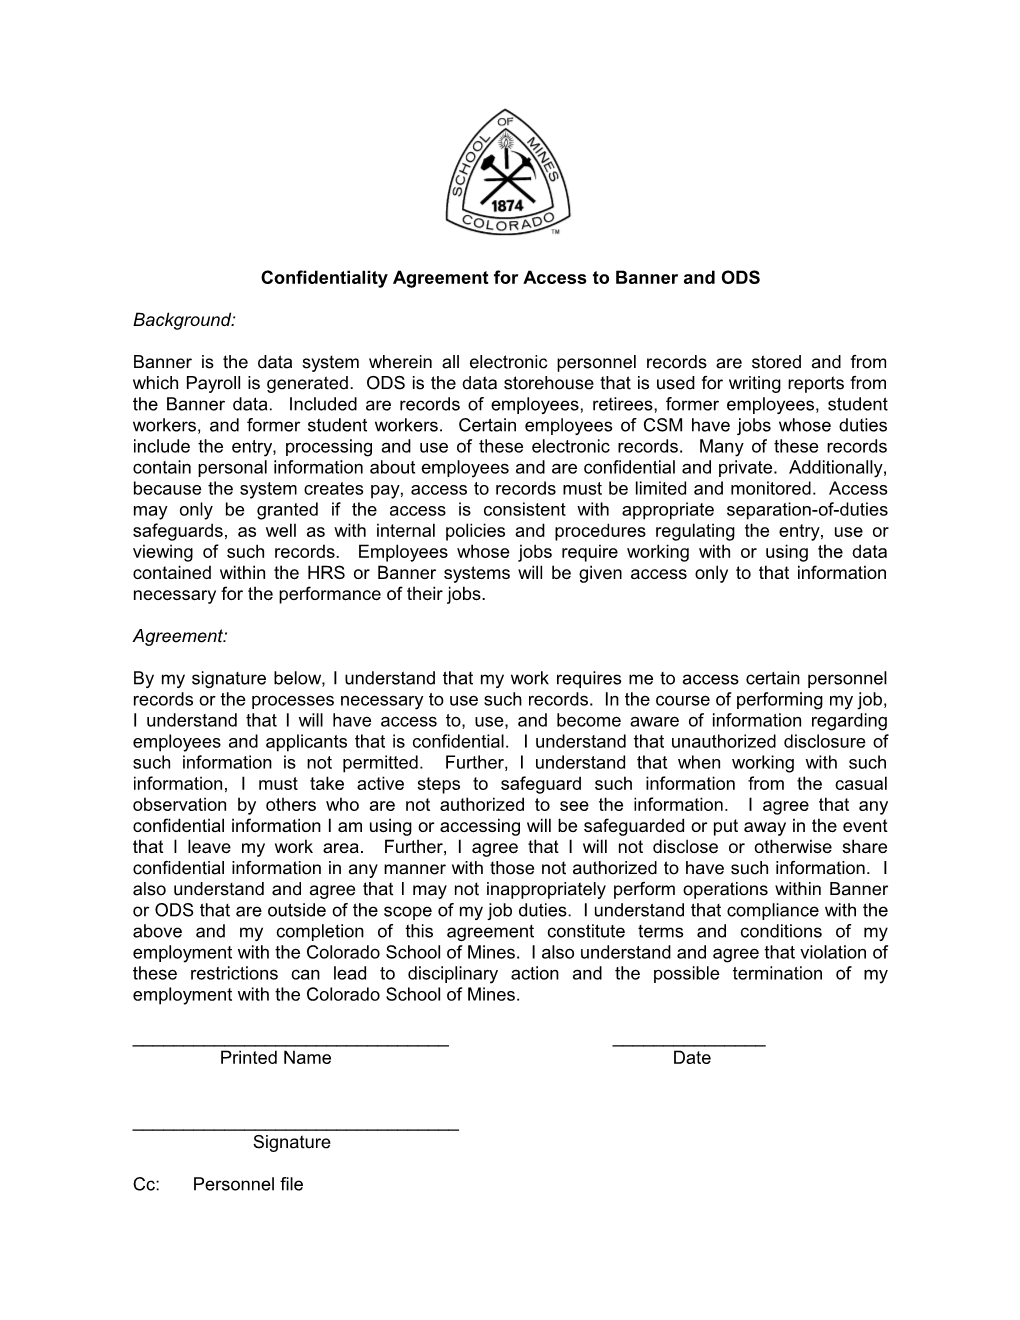 Confidentiality Agreement for Access to Banner and ODS